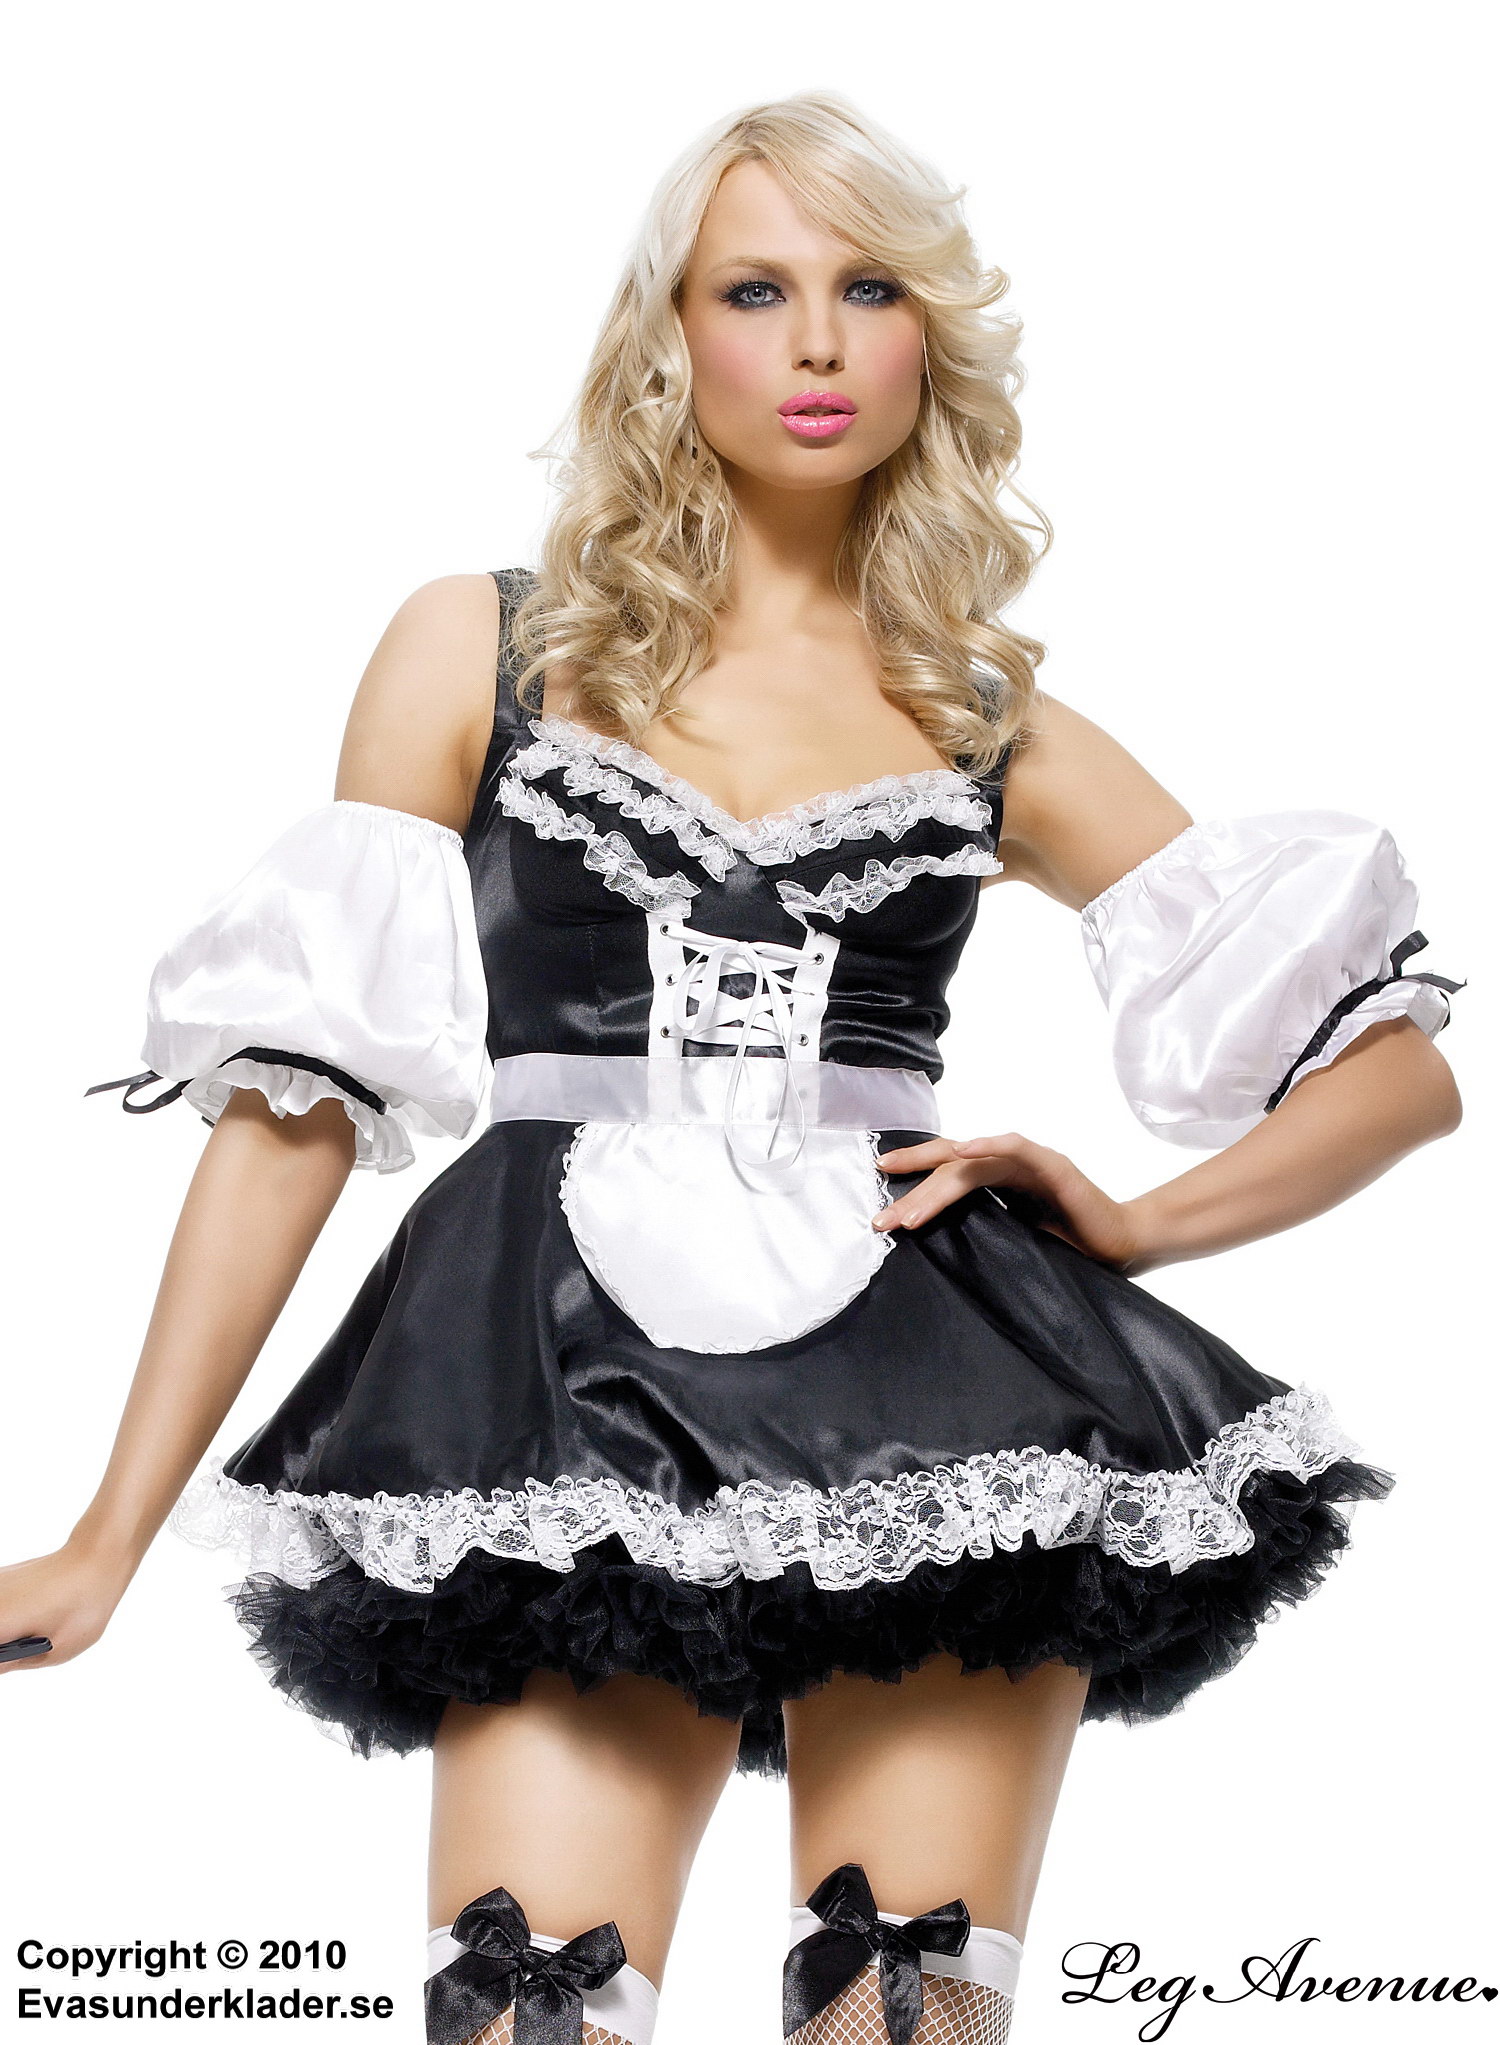 French maid, costume